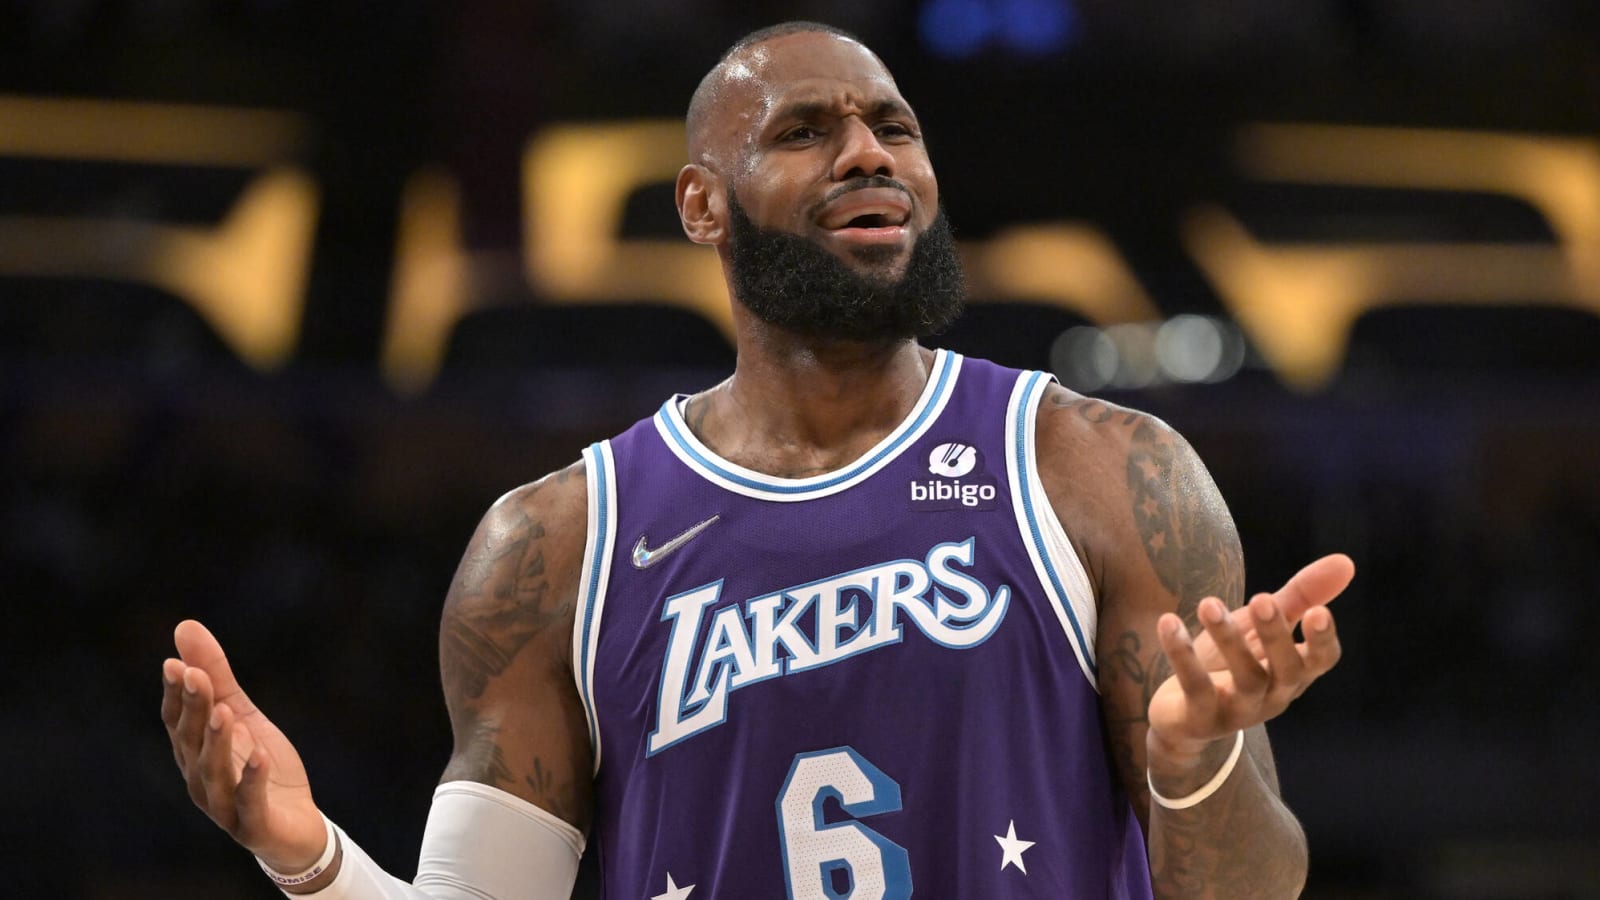 Kareem rips LeBron: He's done things that are 'beneath him'